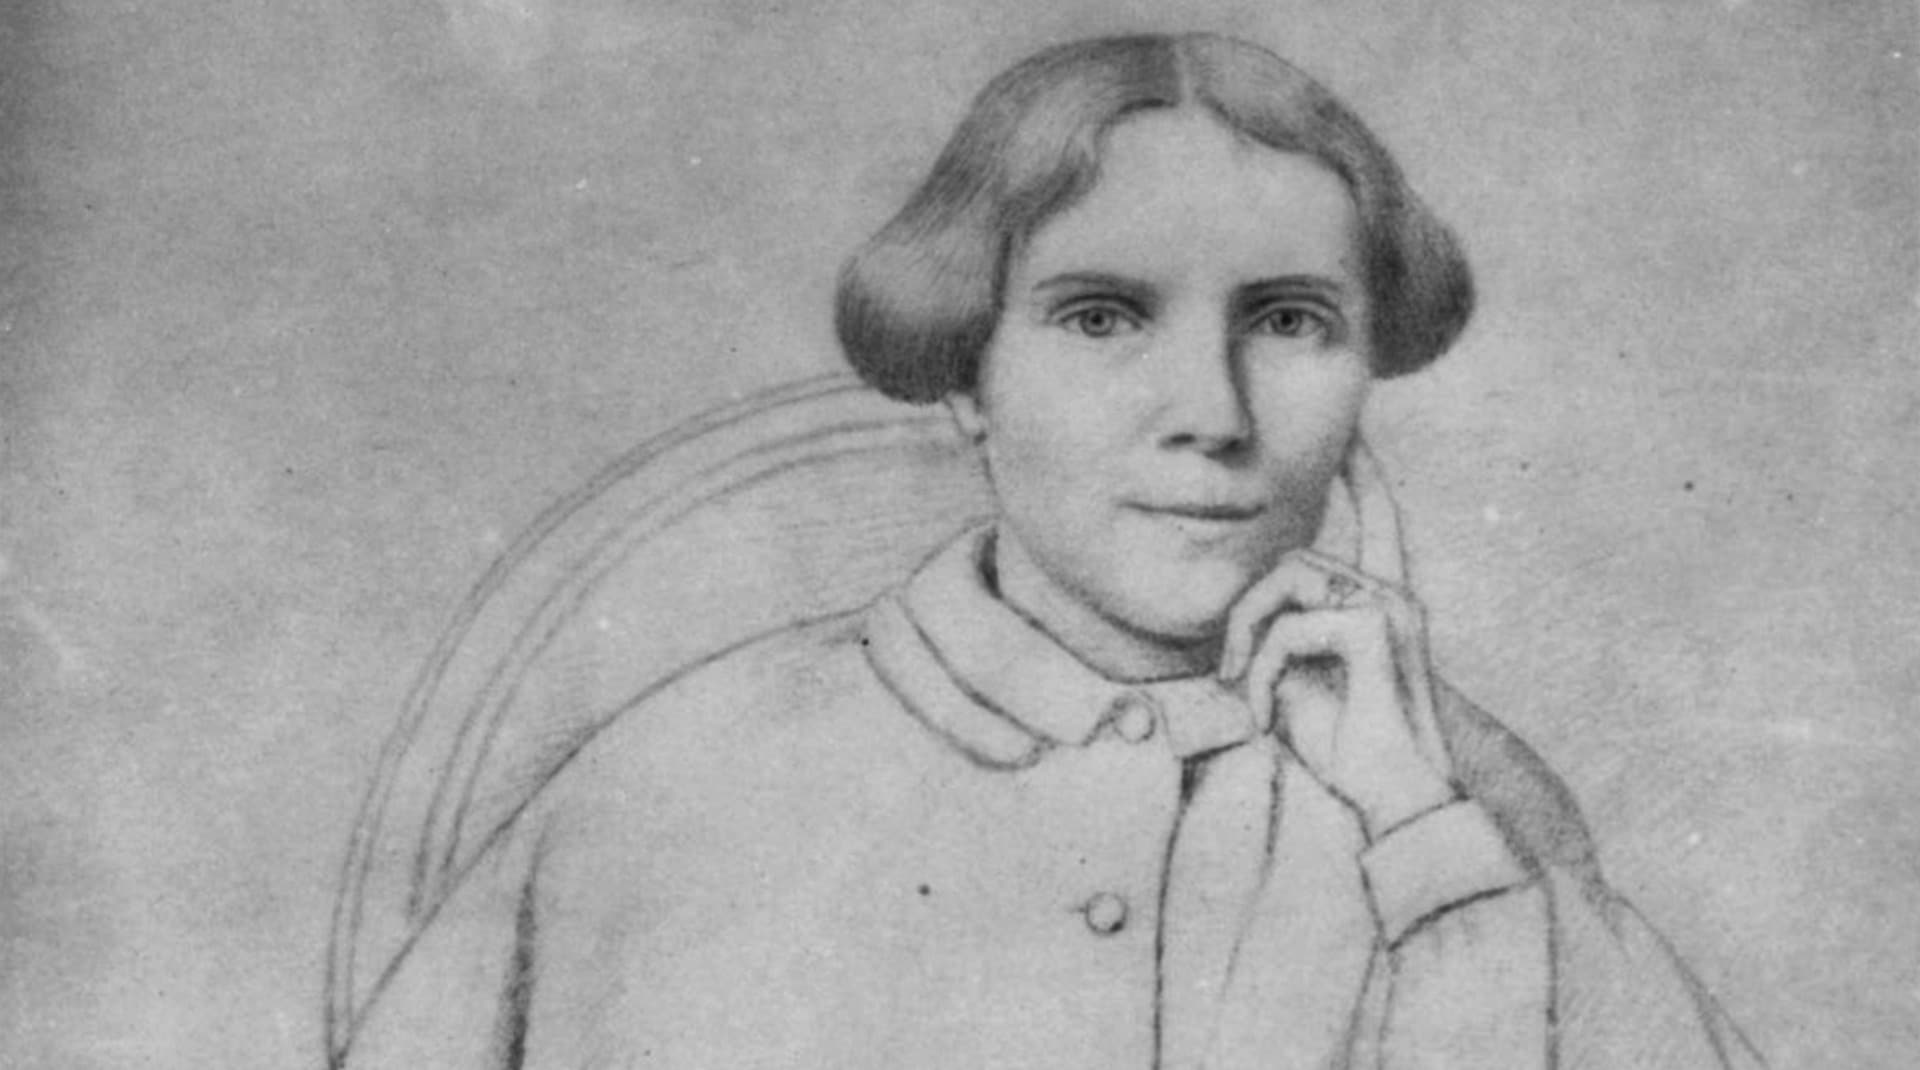 Portrait drawing of Elizabeth Blackwell from the Blackwell family papers.